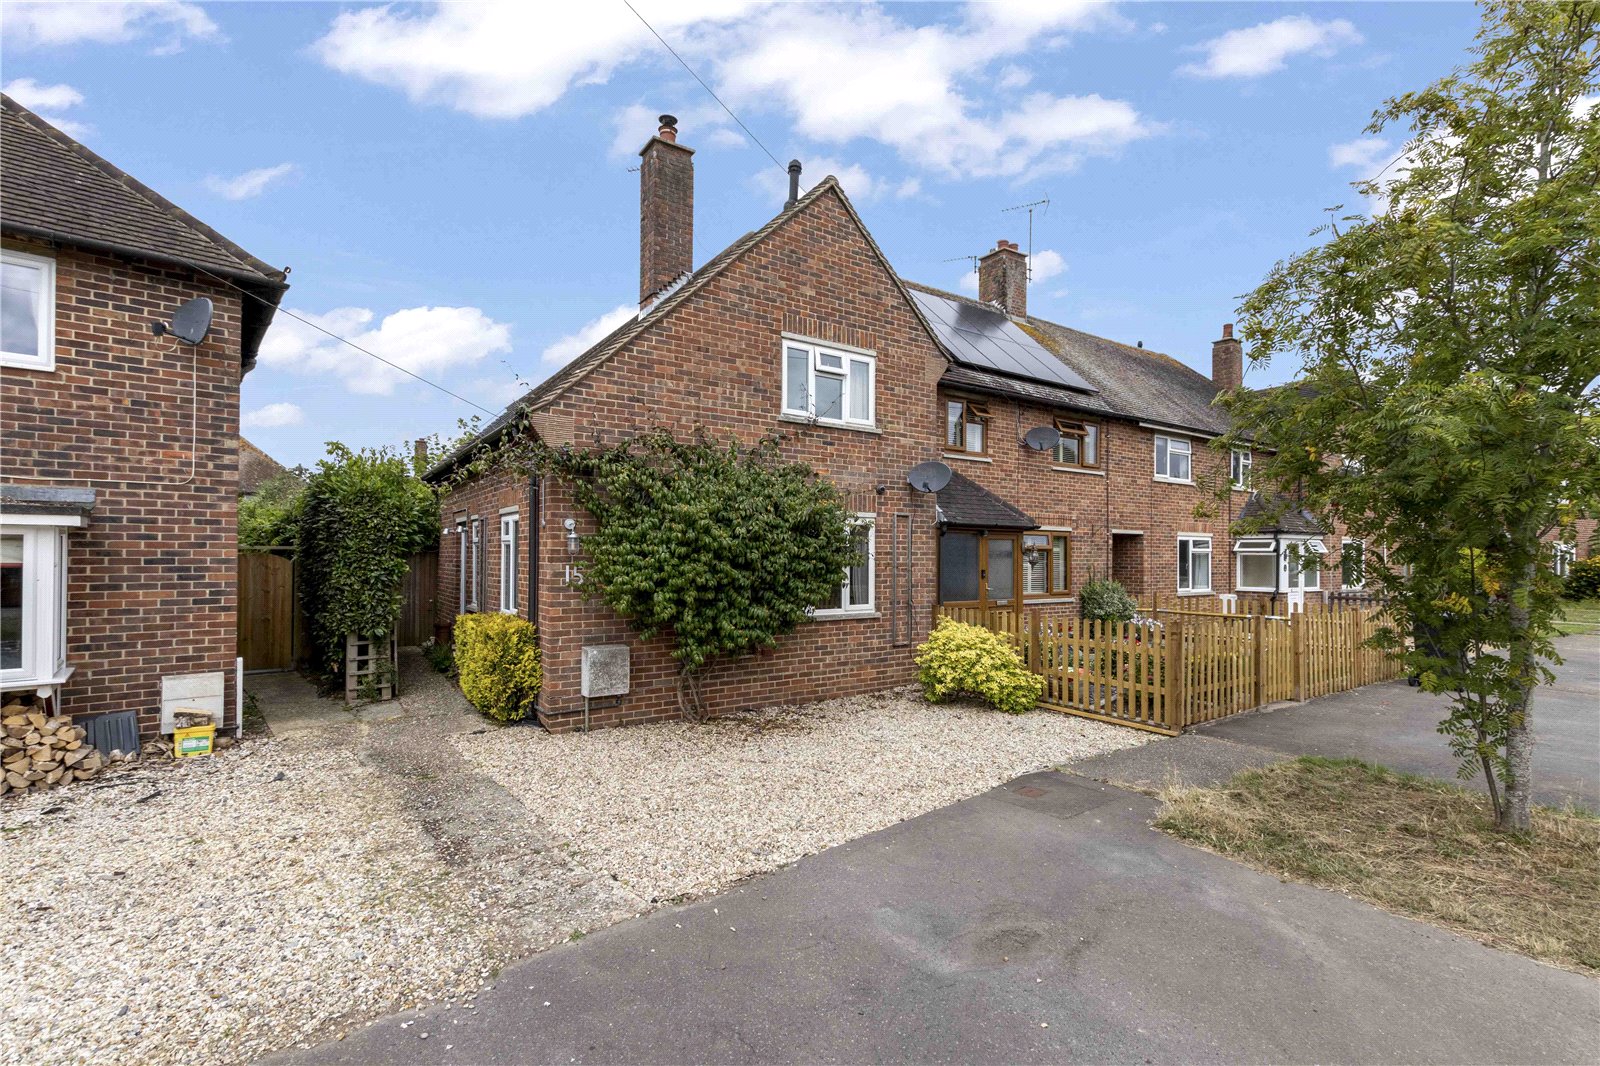 2 bed house for sale in St. Blaises Road, Boxgrove - Property Image 1